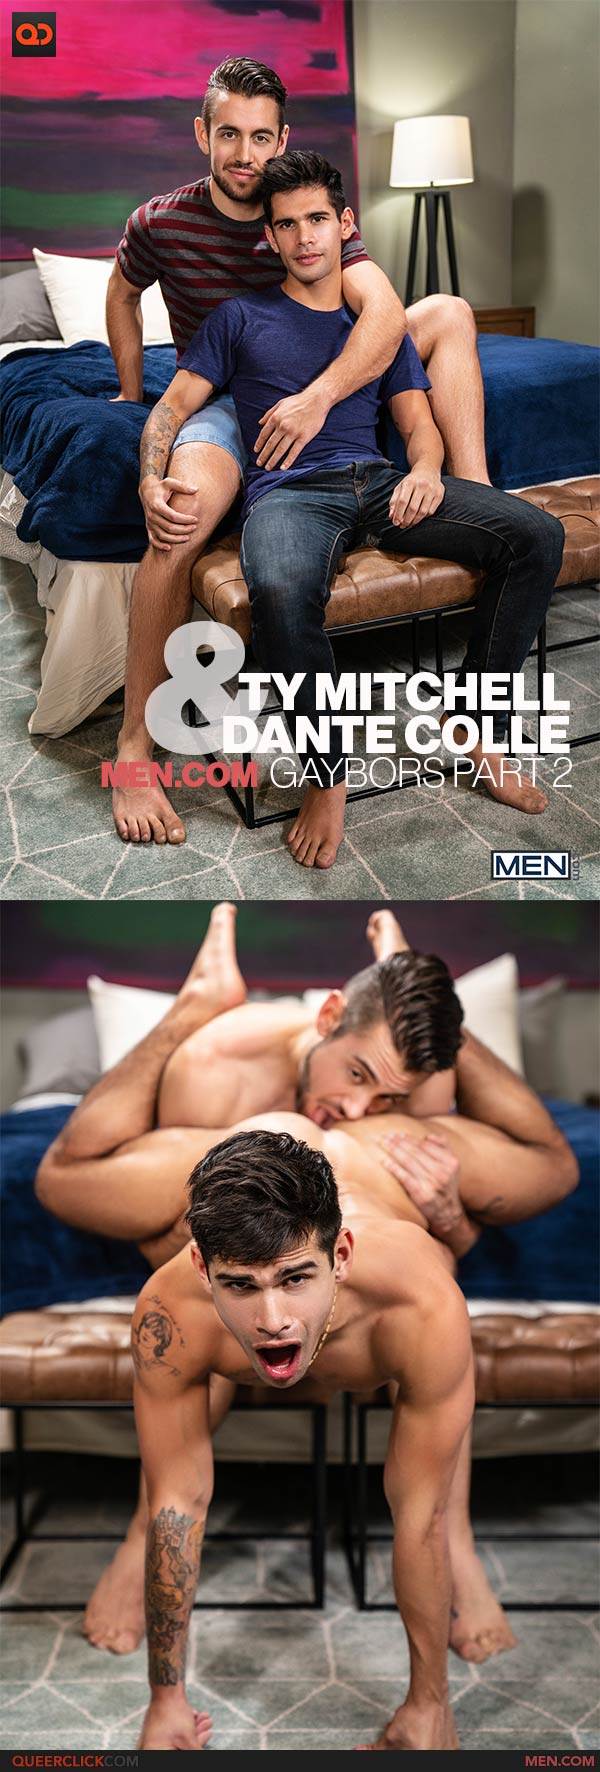 Men.com: Dante Colle and Ty Mitchell